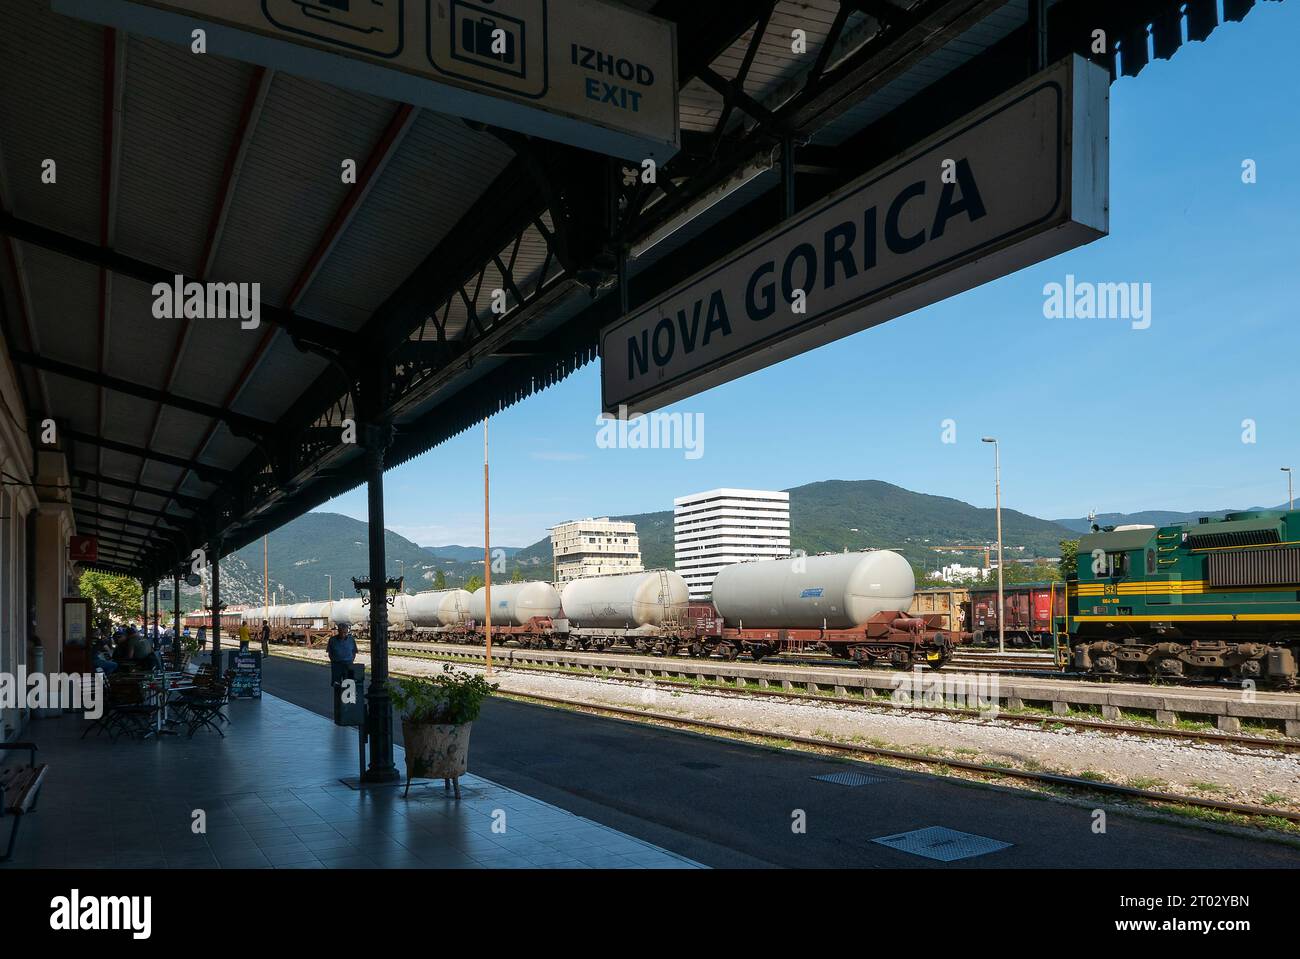 Nova Gorica, Slovenia (30th September 2023) - External view of the old railway station 'Transalpina' with some freight trains still on the rails Stock Photo